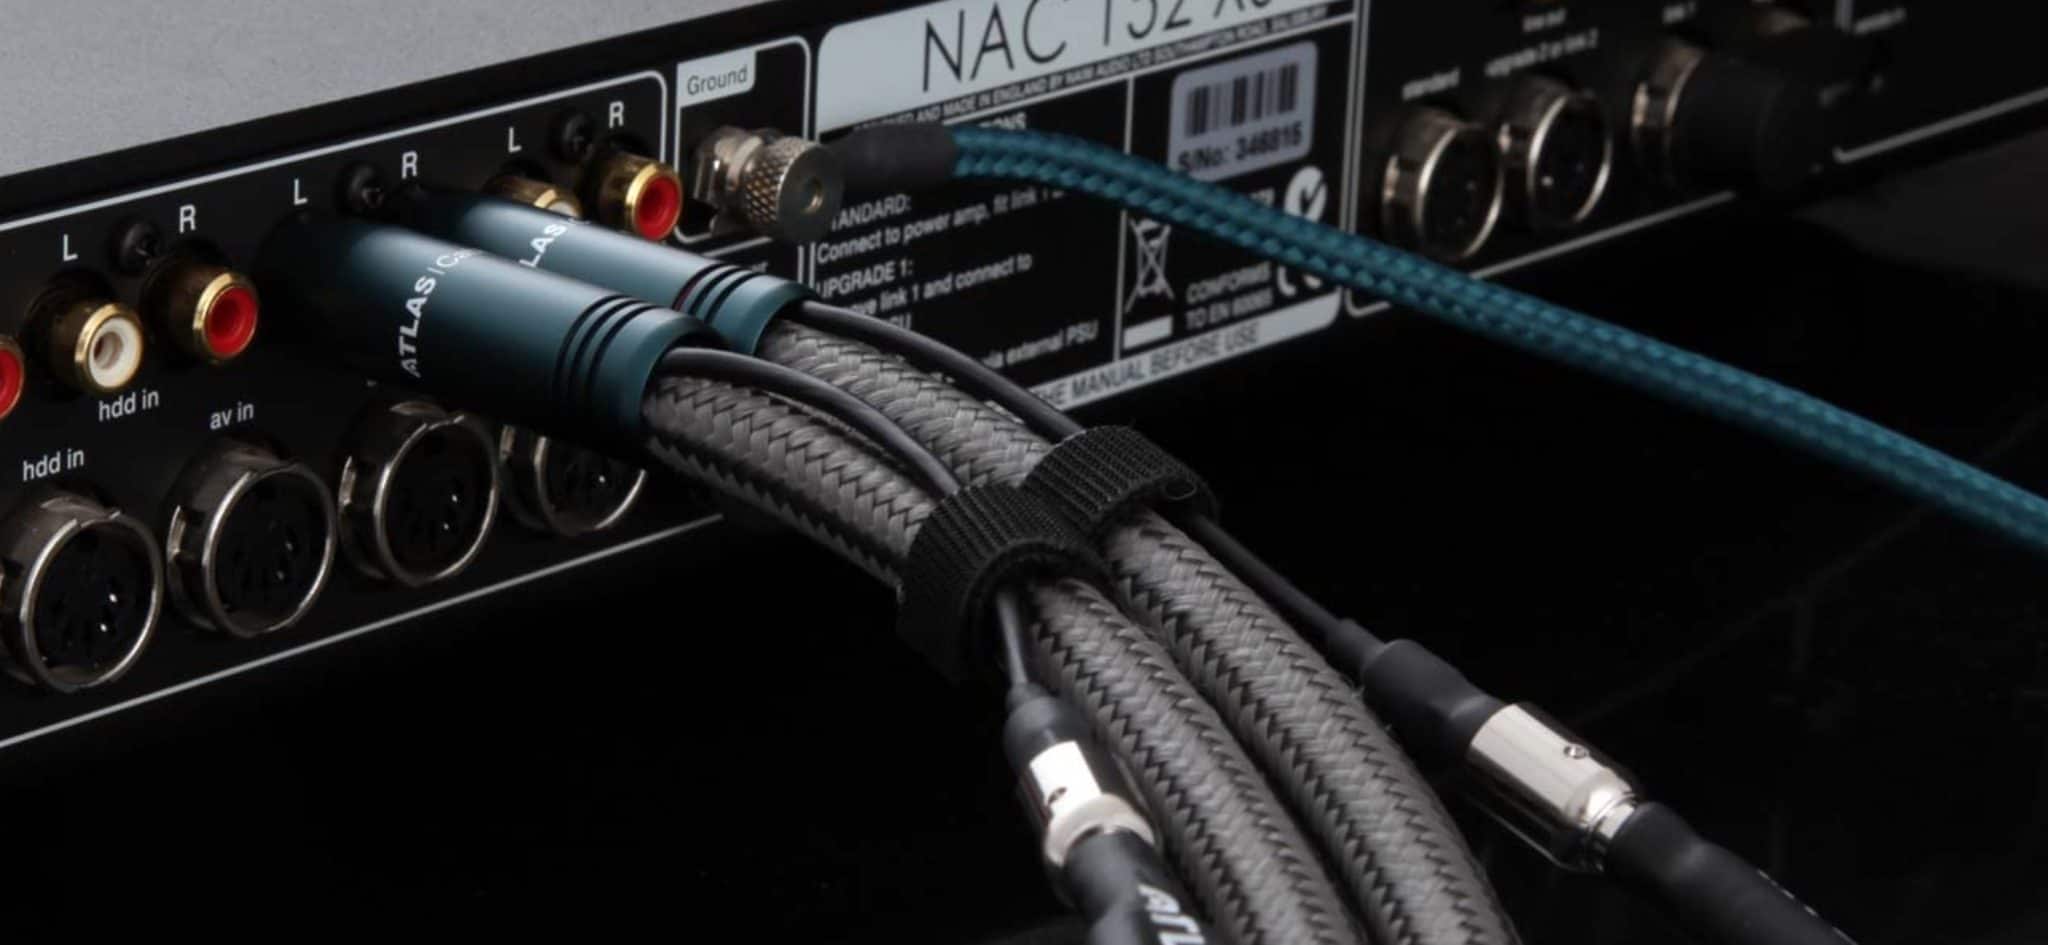 Asimi Grun Cables From Atlas